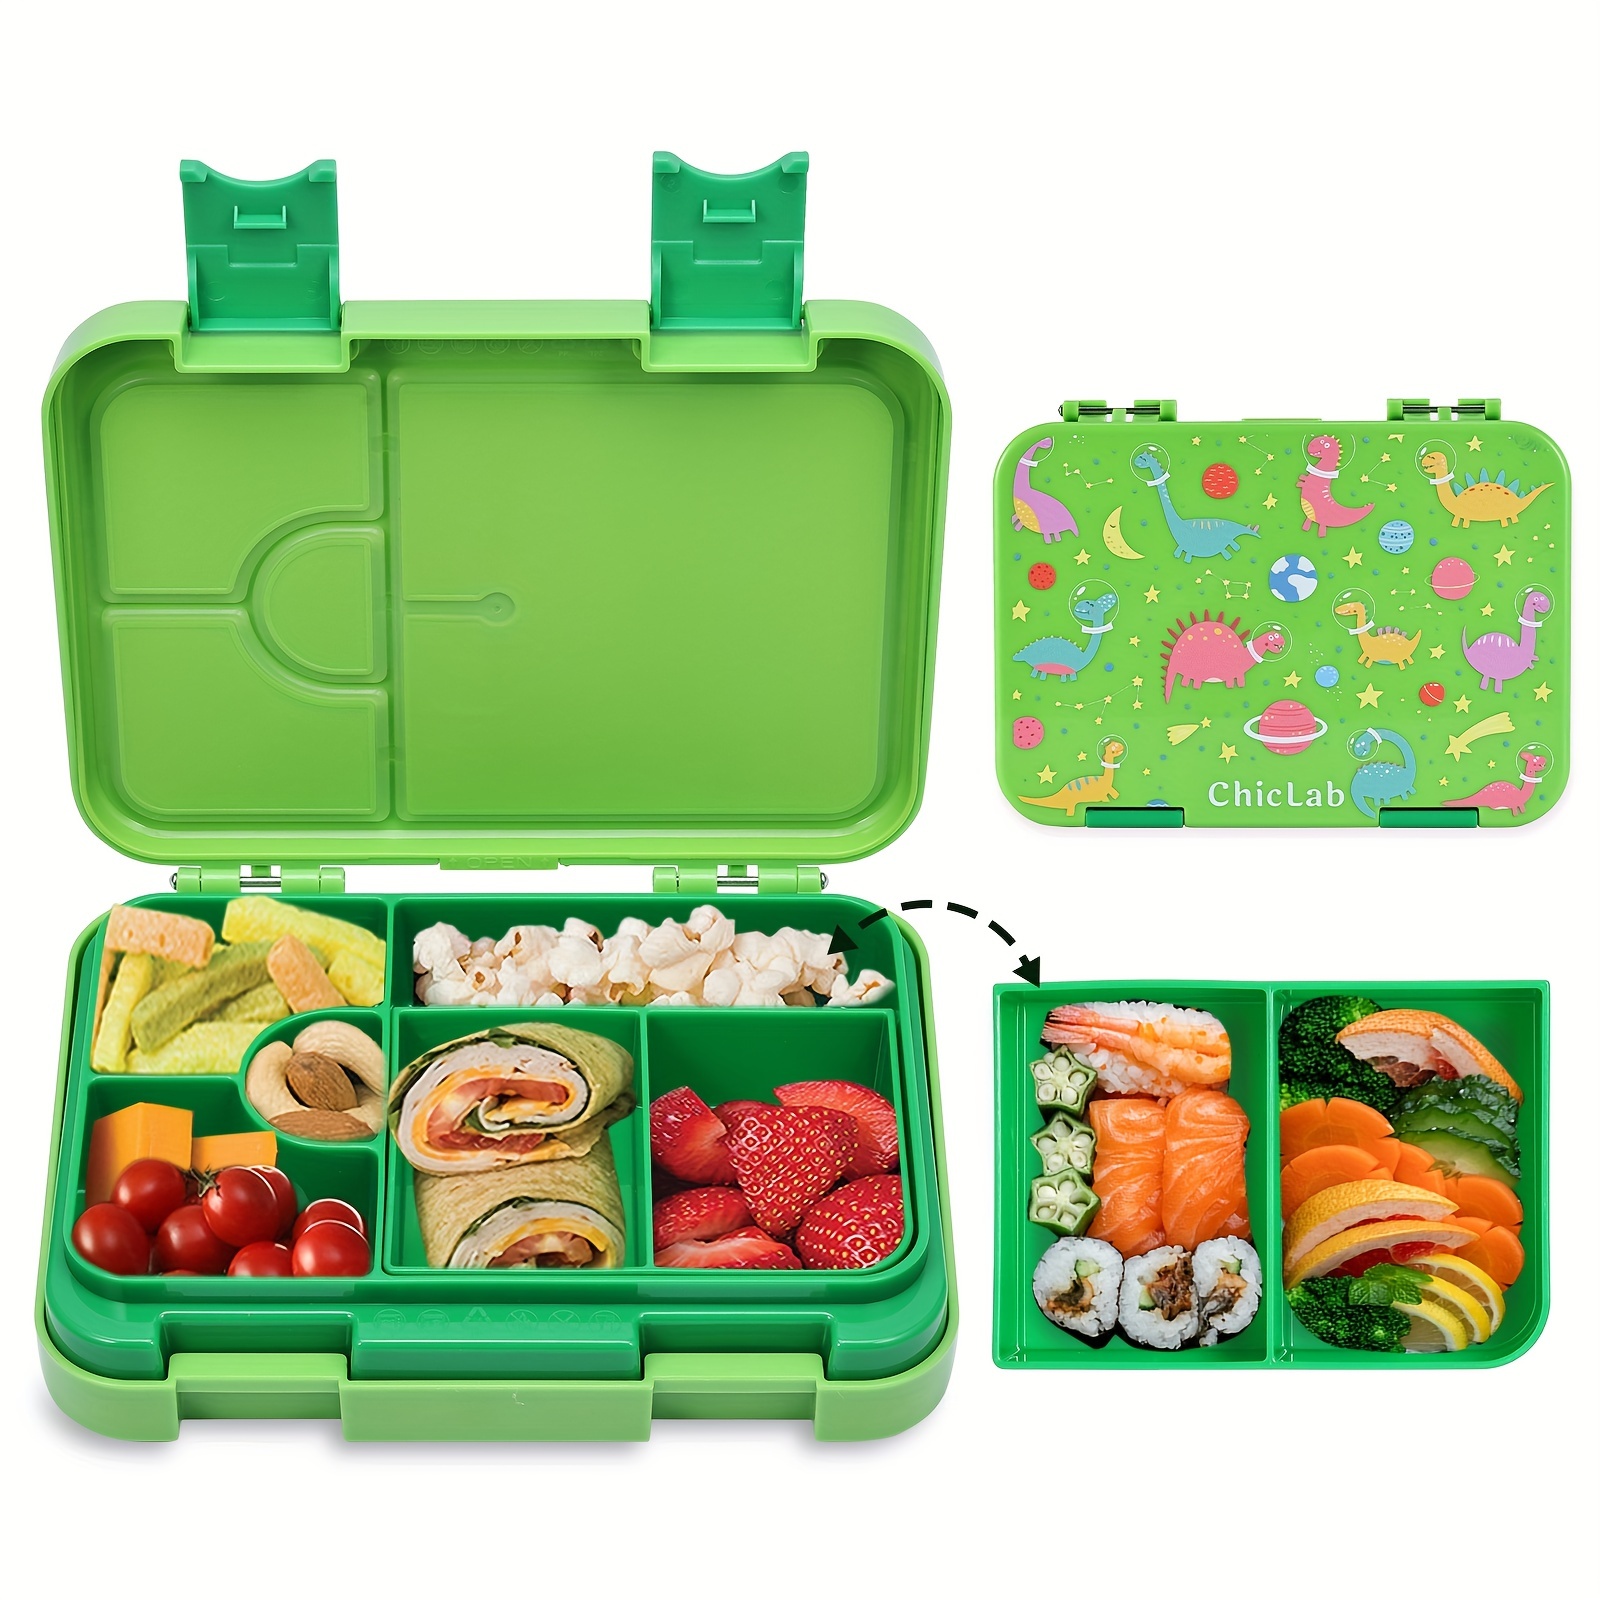  Caperci Stackable Bento Box Adult Lunch Box - 3 Layers